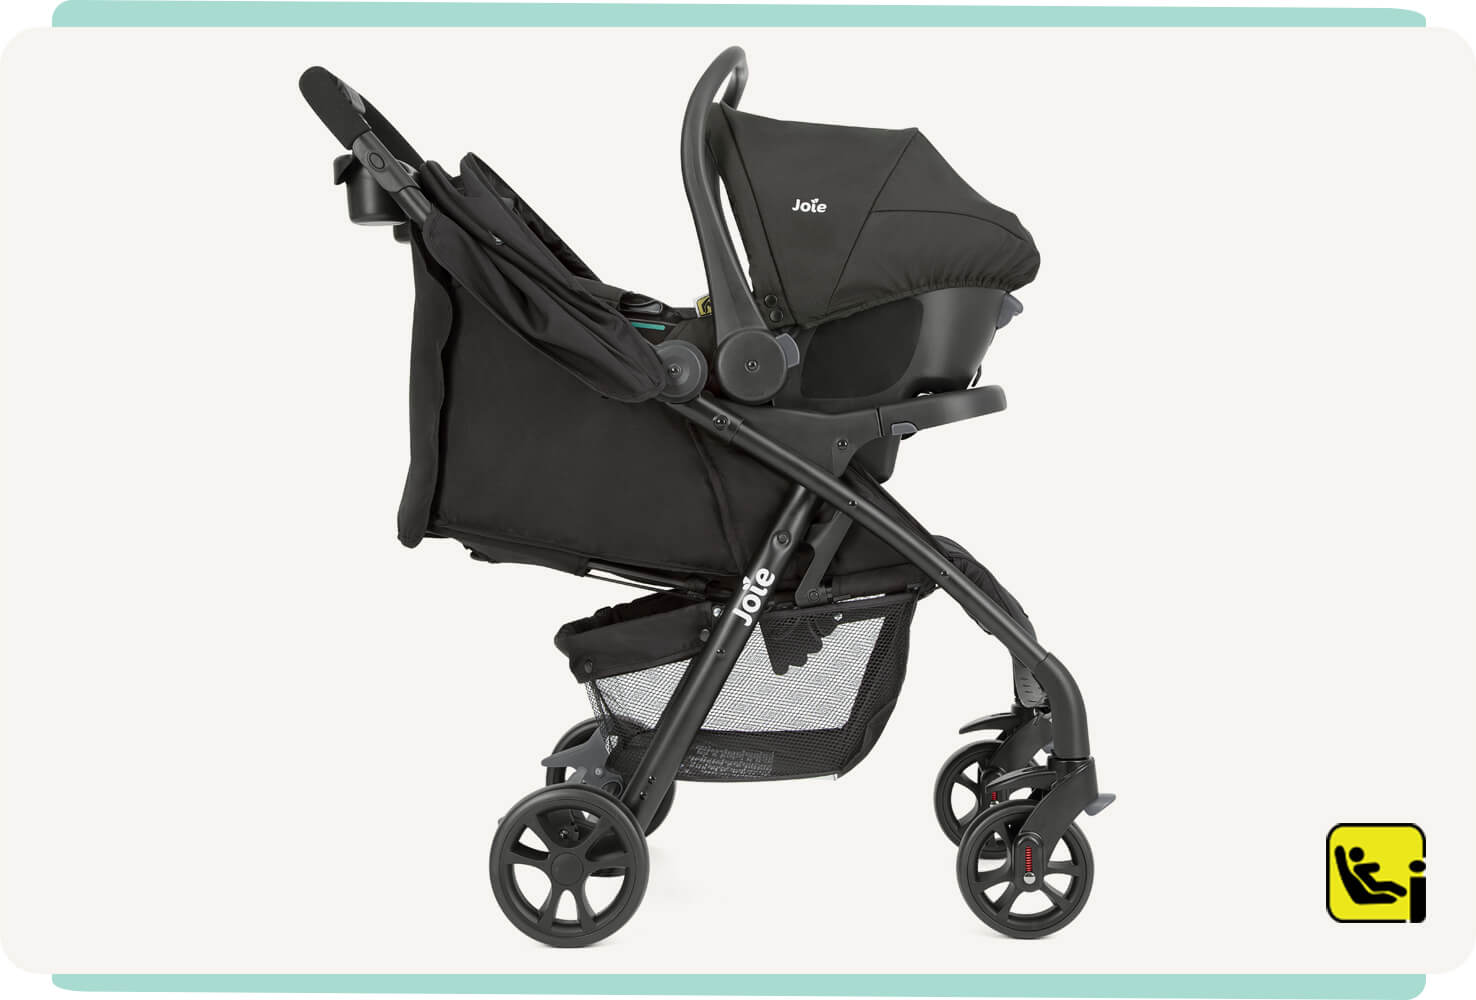  Joie i-Muze lx travel system in black in profile with infant carrier attached.